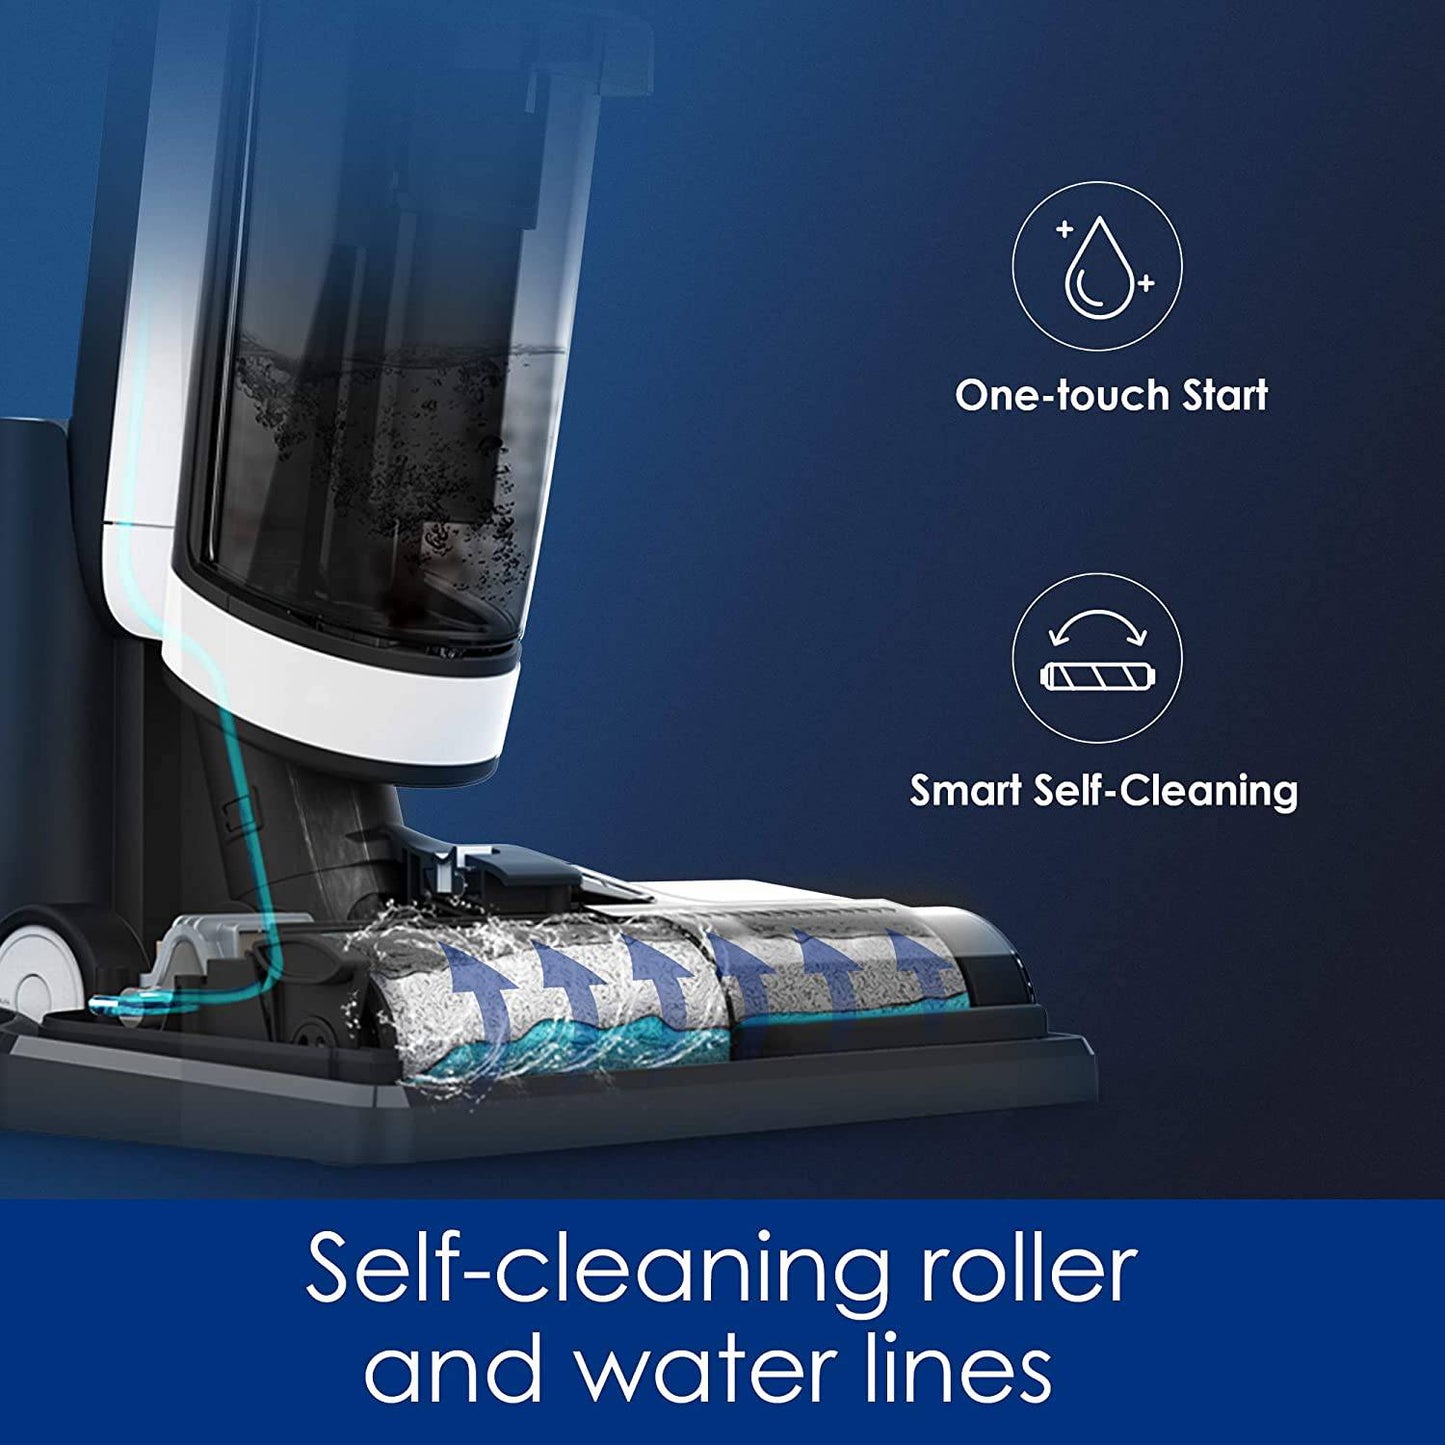 COOLBABY ZZR-XDJ Floor Cleaner, Wet and Dry Vacuum Cleaner - COOLBABY